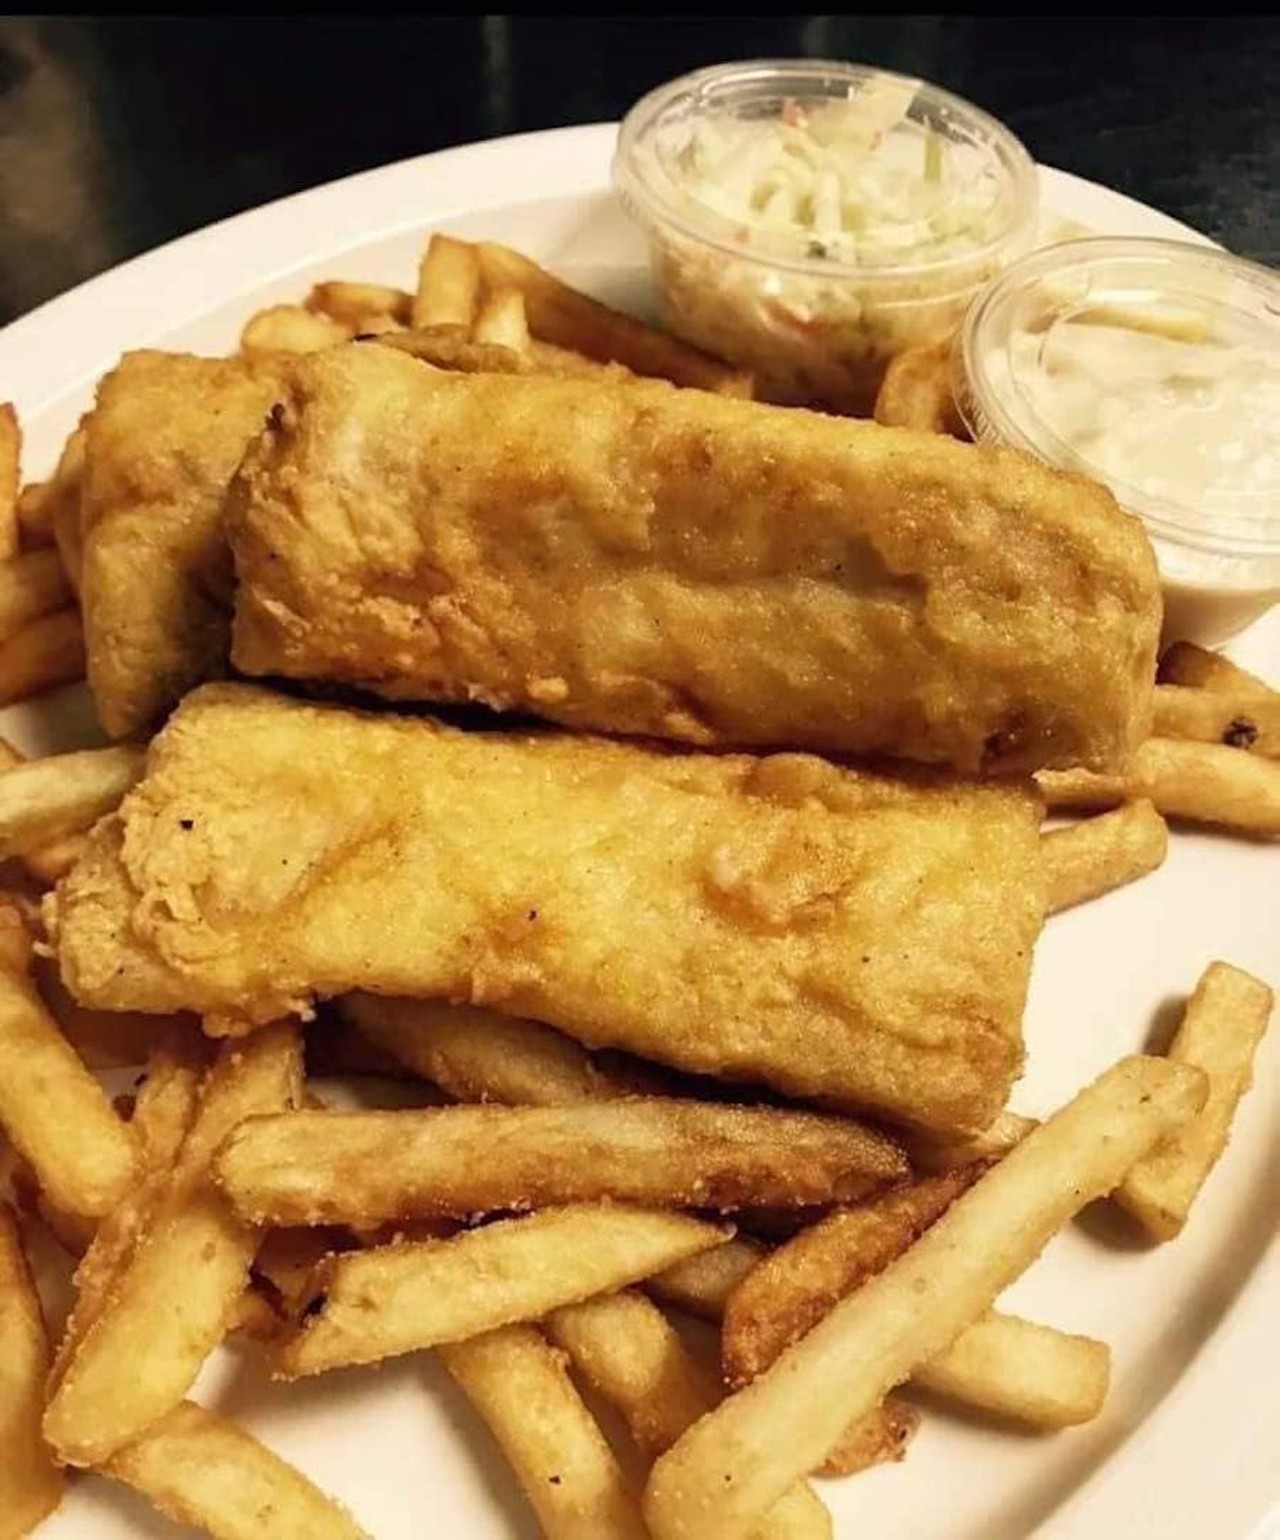 Crow's Nest Bar and Grill
6166 N. Canton Rd., Canton; 734-459-4020; crowsnestcanton.com
All-you-can-eat fish and chips are available every Friday and include cod hand-dipped in a light, beer-batter, served with fries and coleslaw.
Photo via Crow's Nest Bar and Grill/Facebook